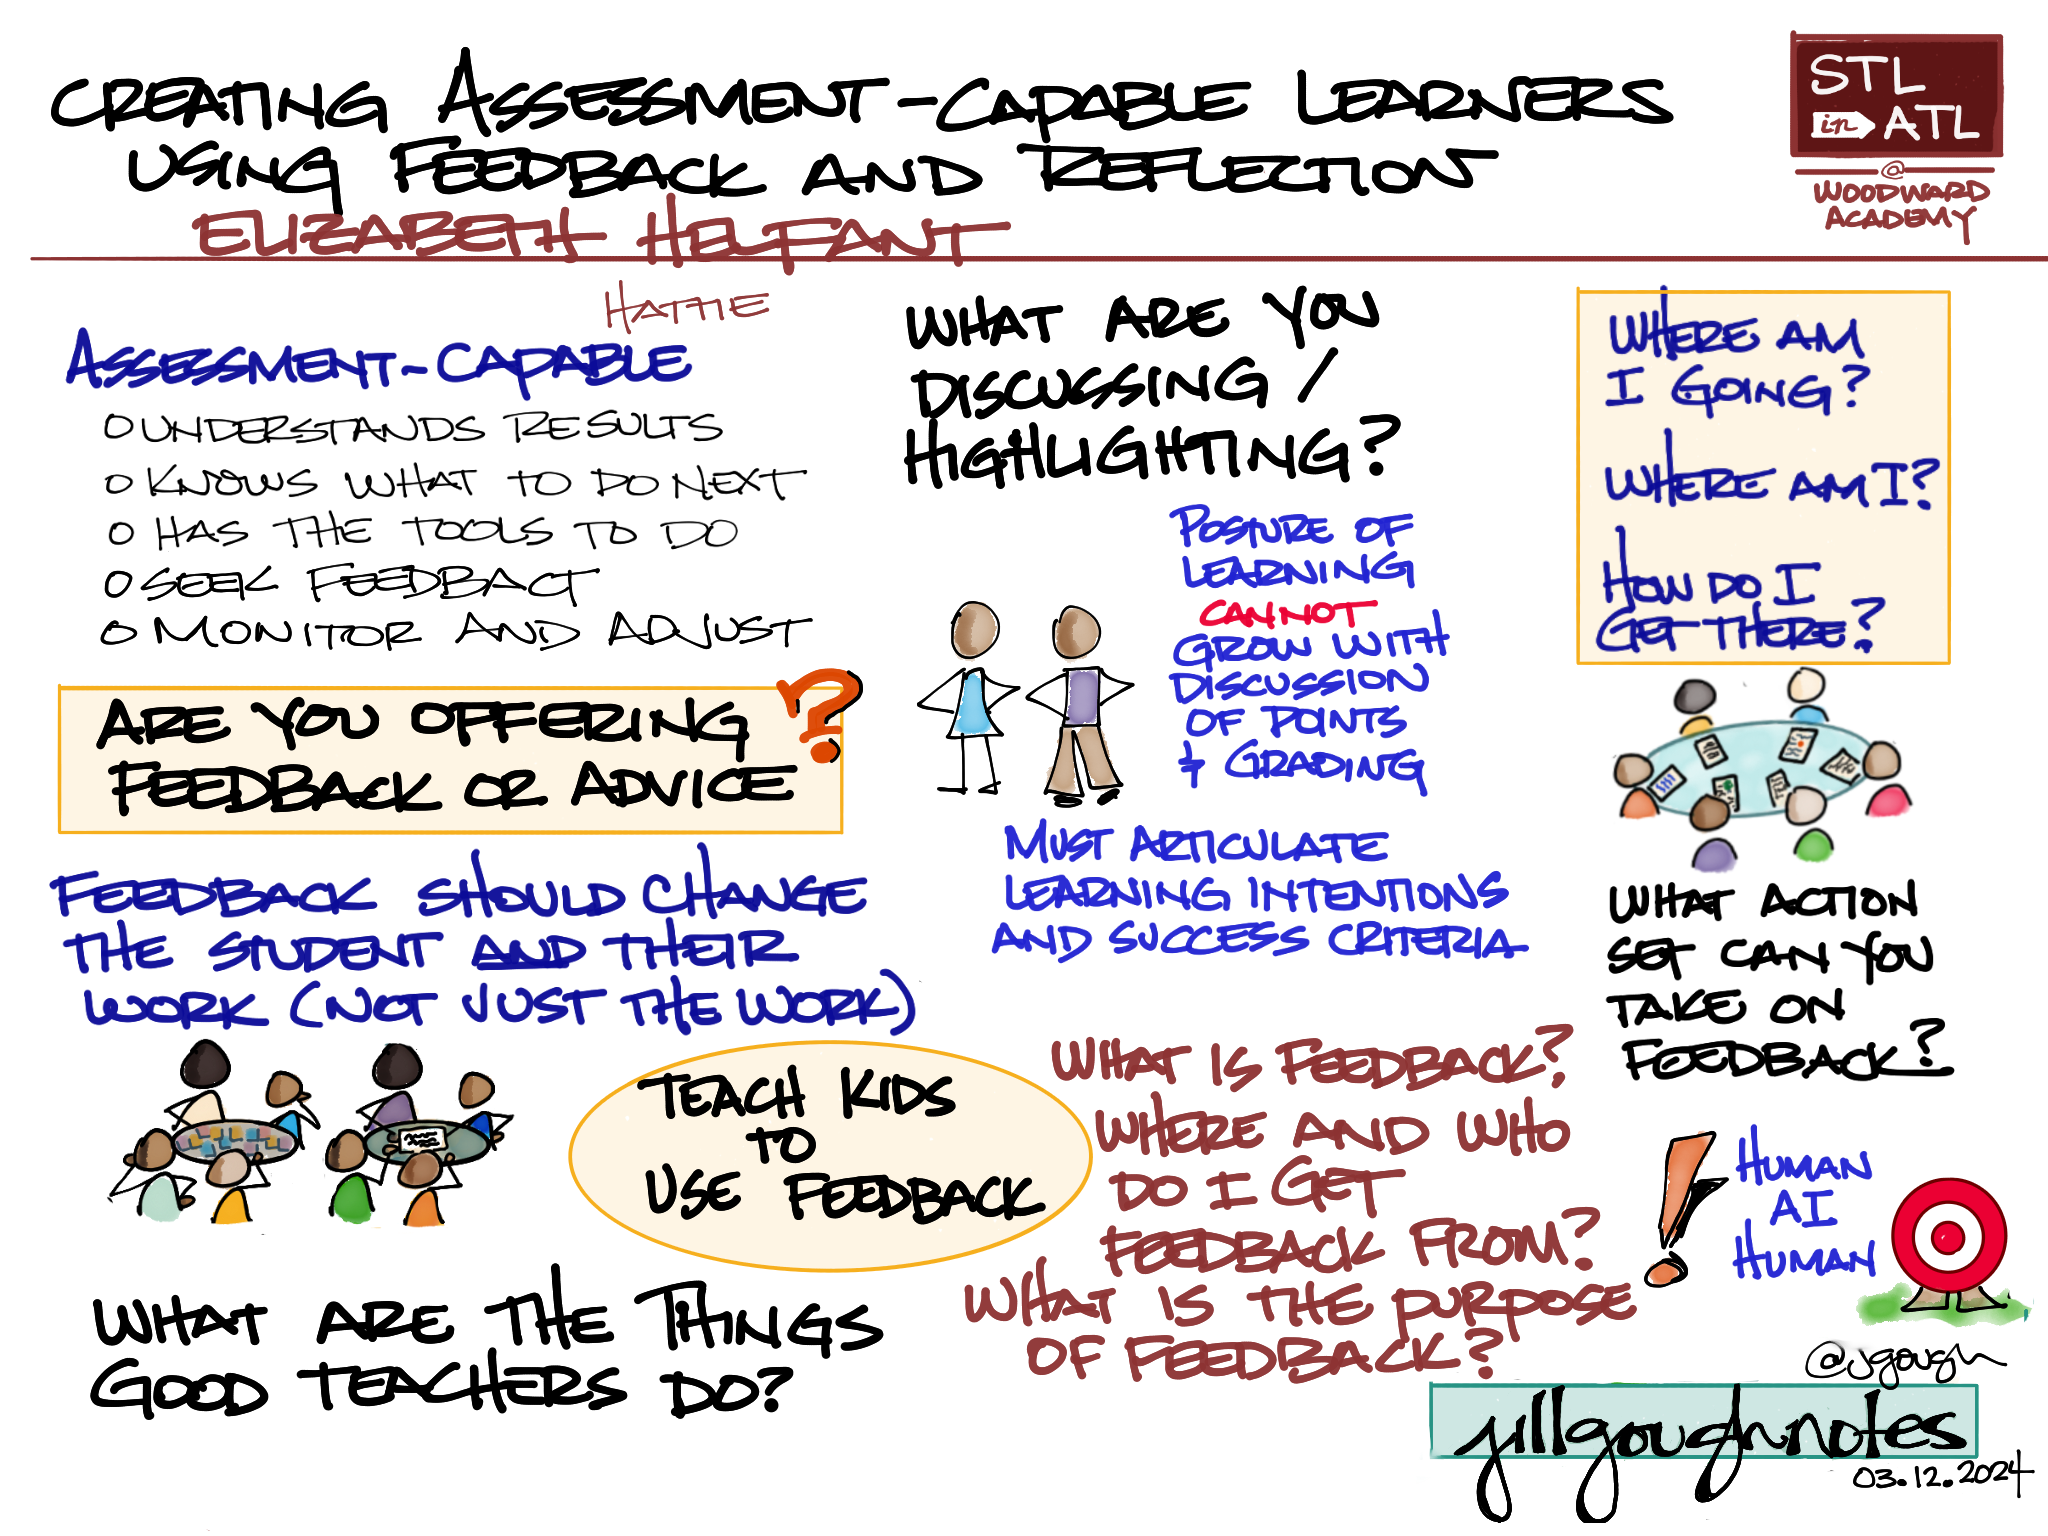 Creating Assessment-Capable Learners using Feedback and Reflection from Elizabeth Helfant #STLinATL